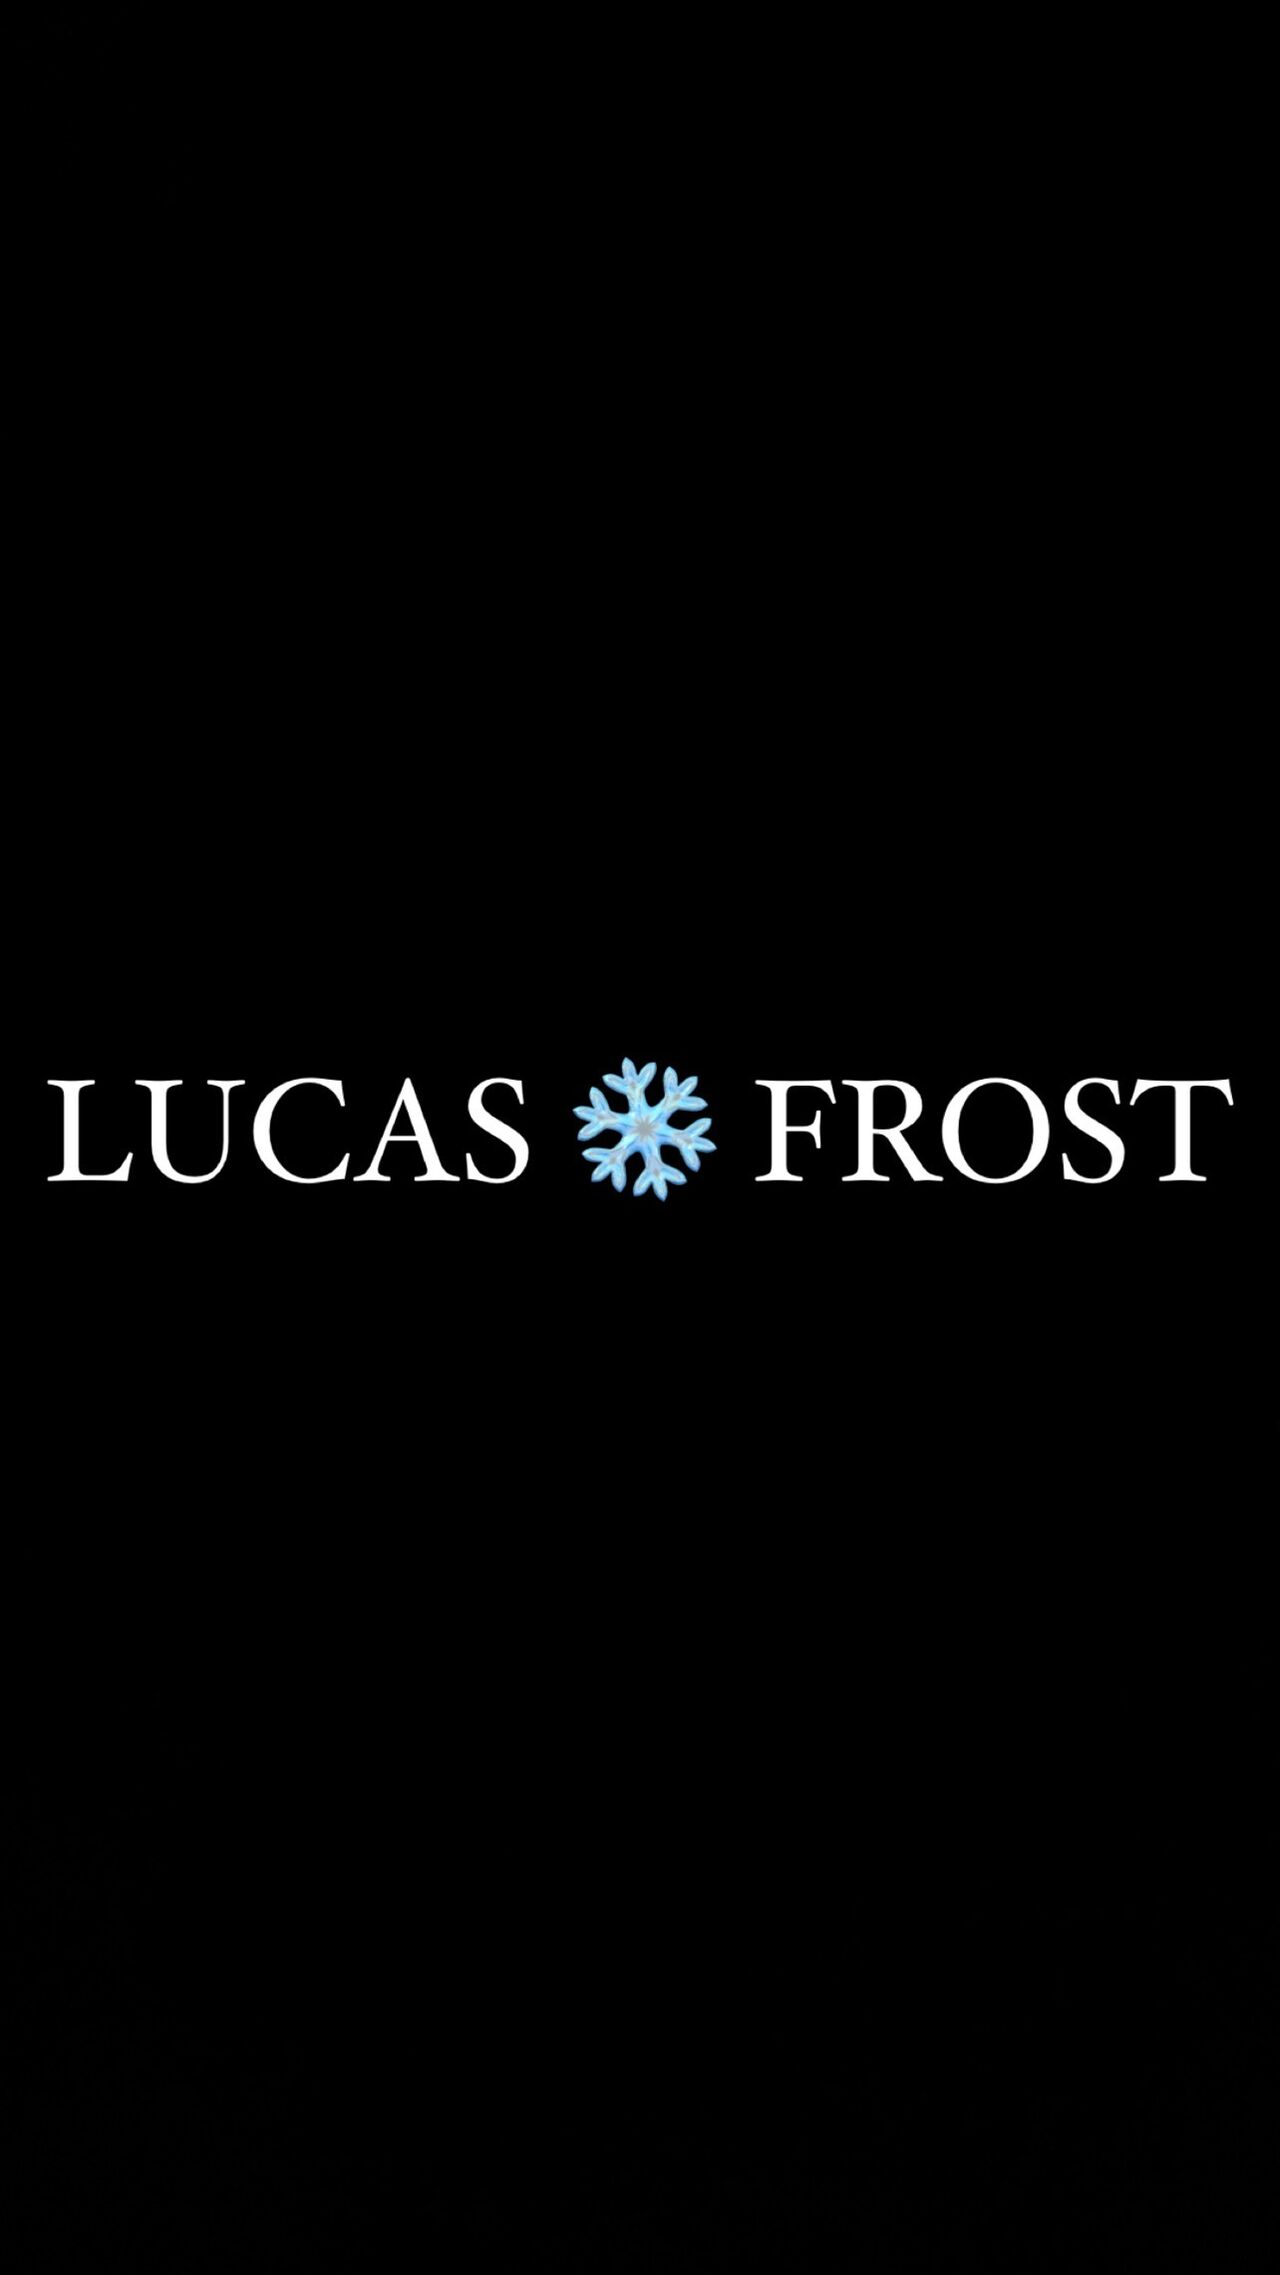 See Lucas Frost❄️ profile